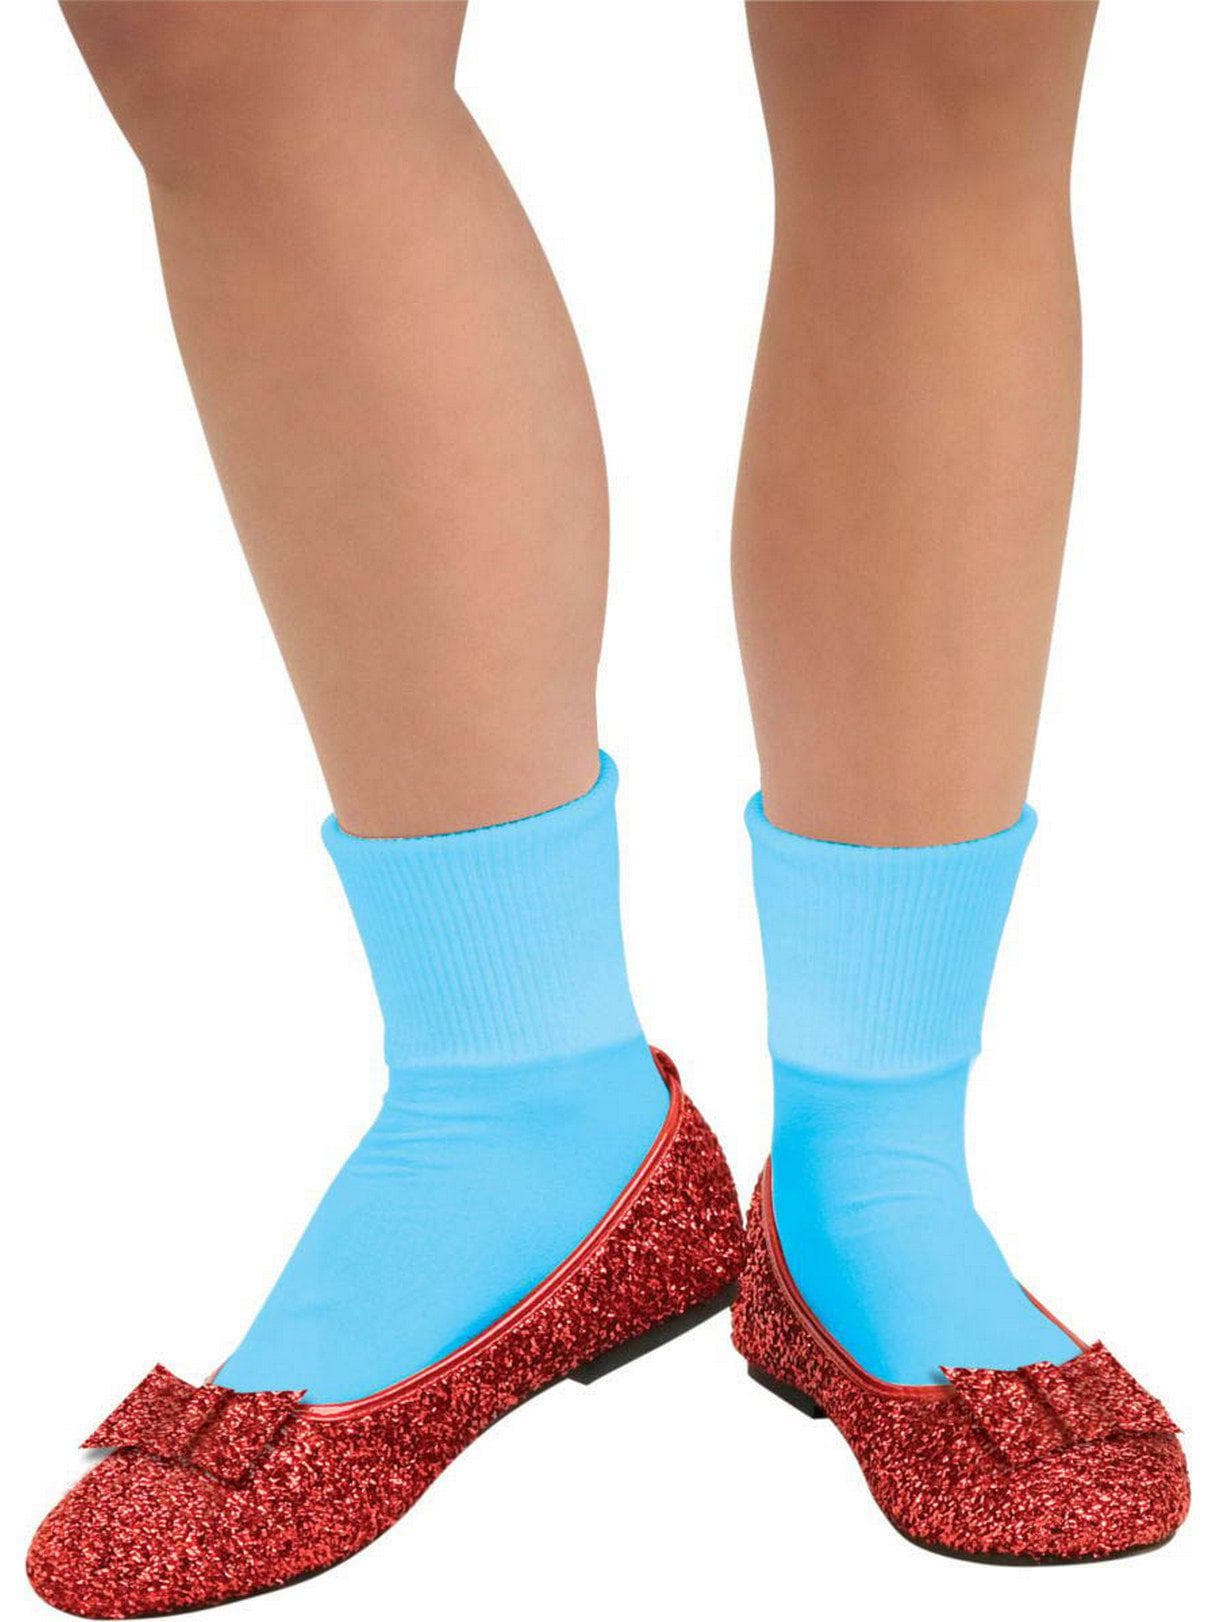 Women's Red Glitter Ballet Deluxe Shoes - costumes.com